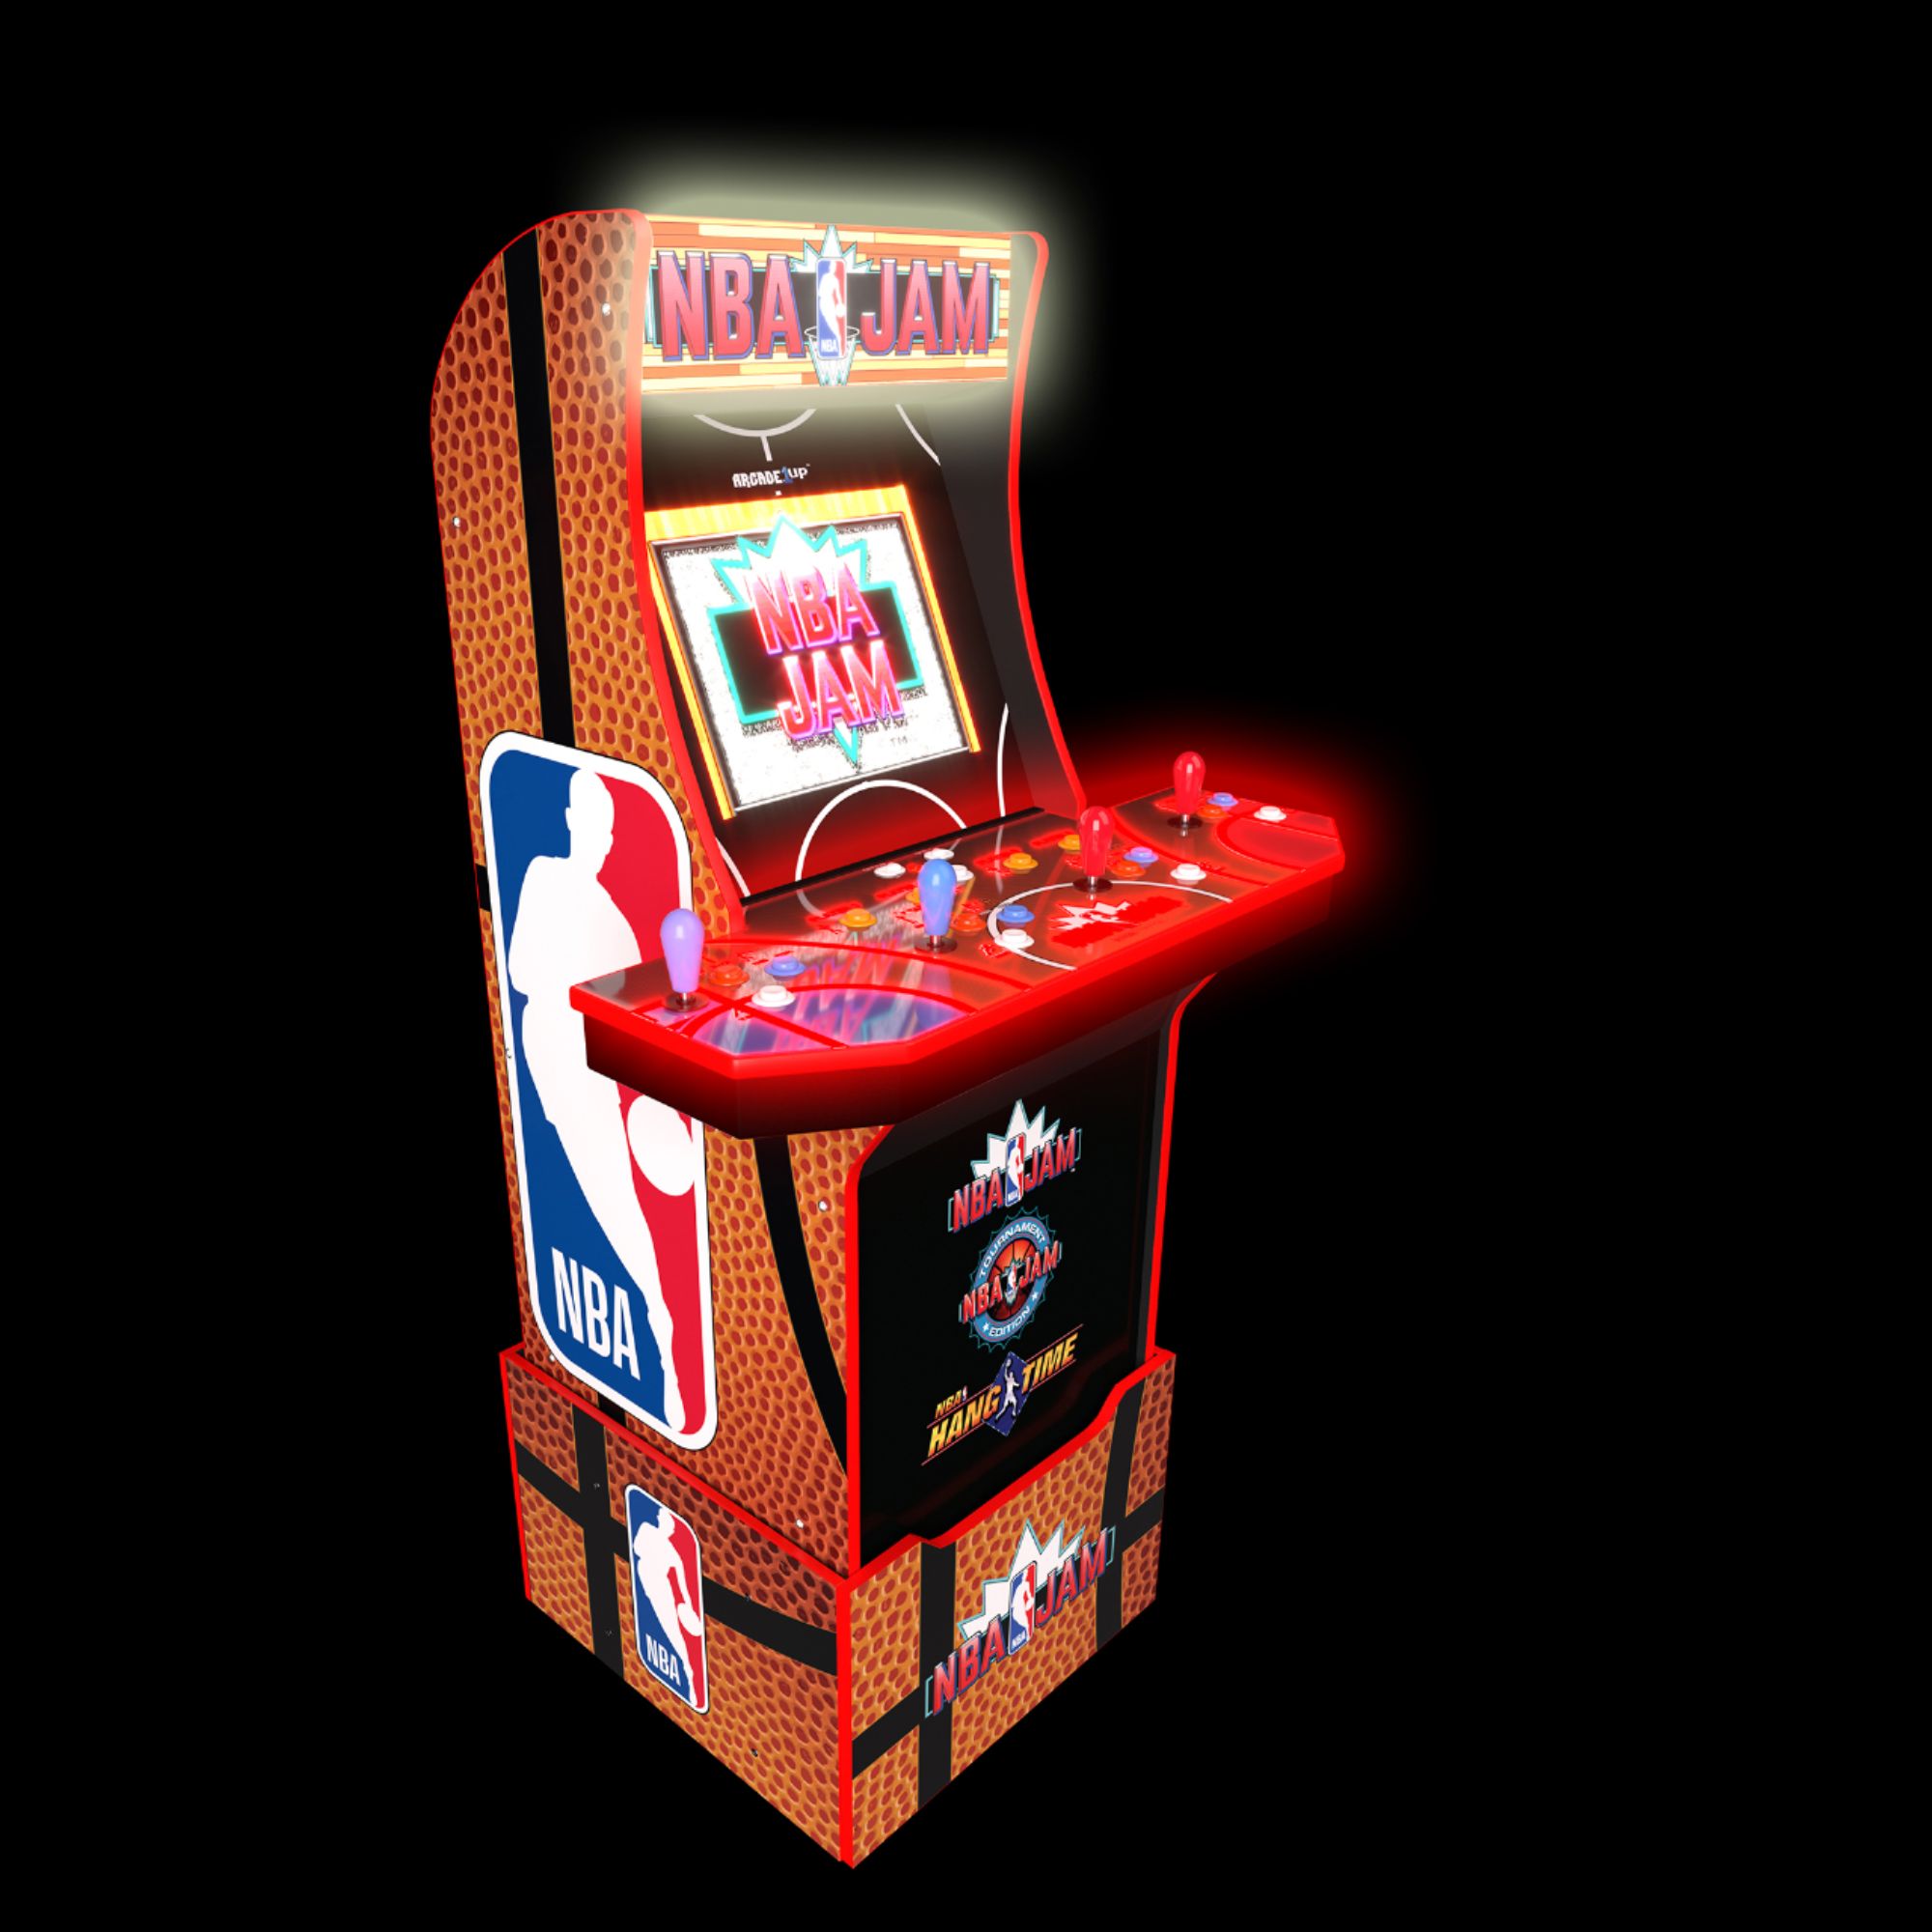 NBA Jam Arcade with lots of new parts-Looks new, extra sharp-Delivery –  Arcades Market